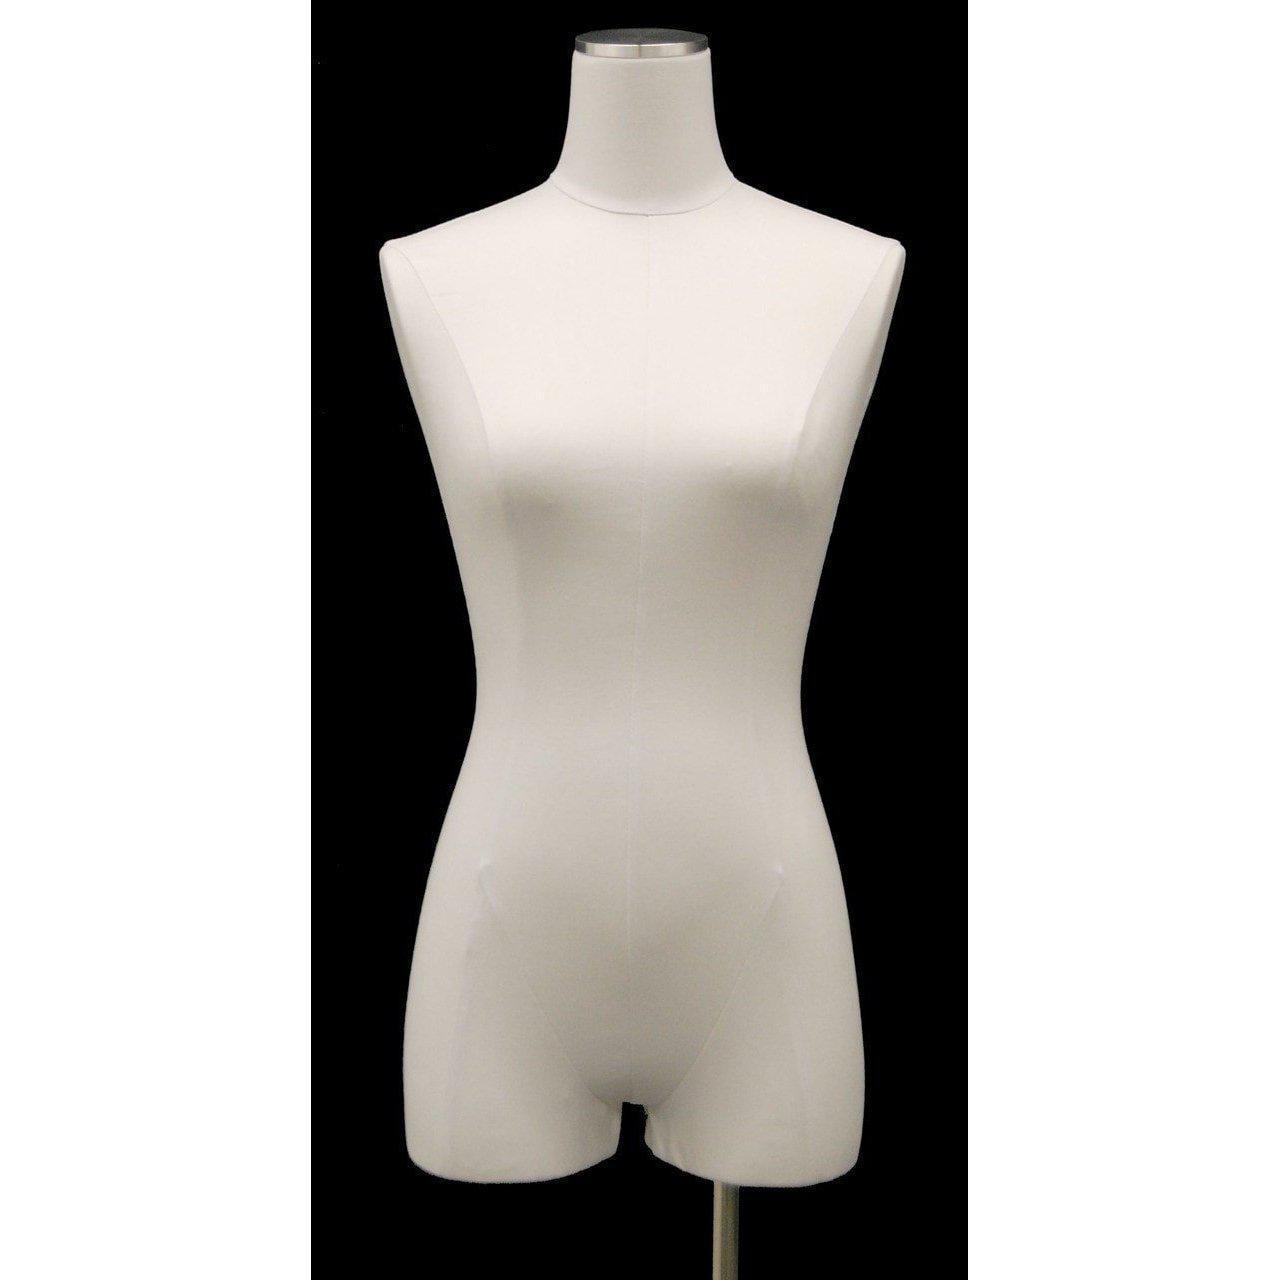 Female Dress Form Pinnable, Tailor Dressmaker Mannequin Adjustable  Small/Large Sewing Manikin Body with Stick The Line & Base Wheels, School  Student